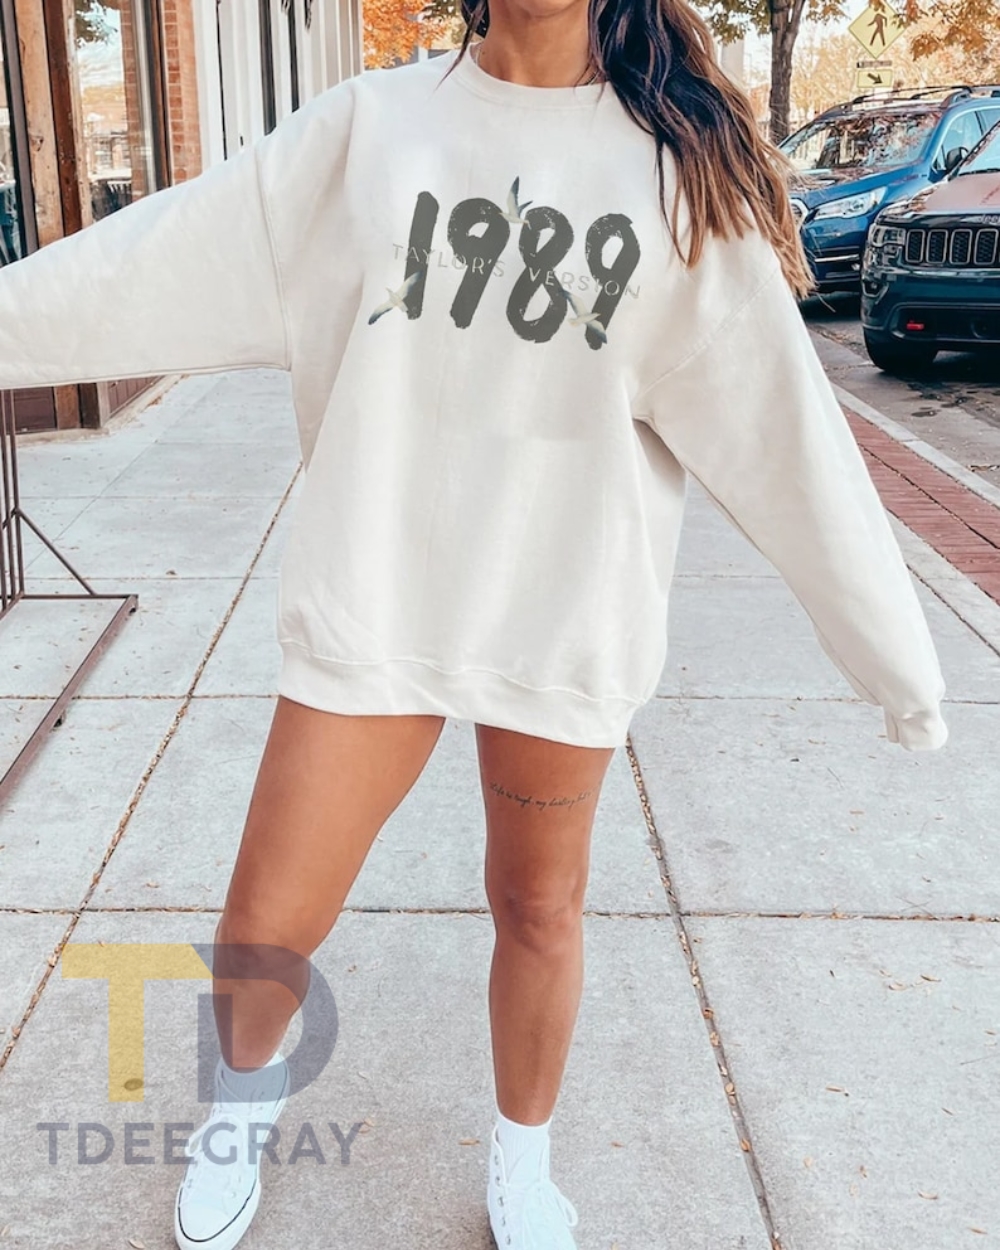 Gift For Him Her Of A Trendy 1989 Taylor's Version Hoodie Sweatshirt